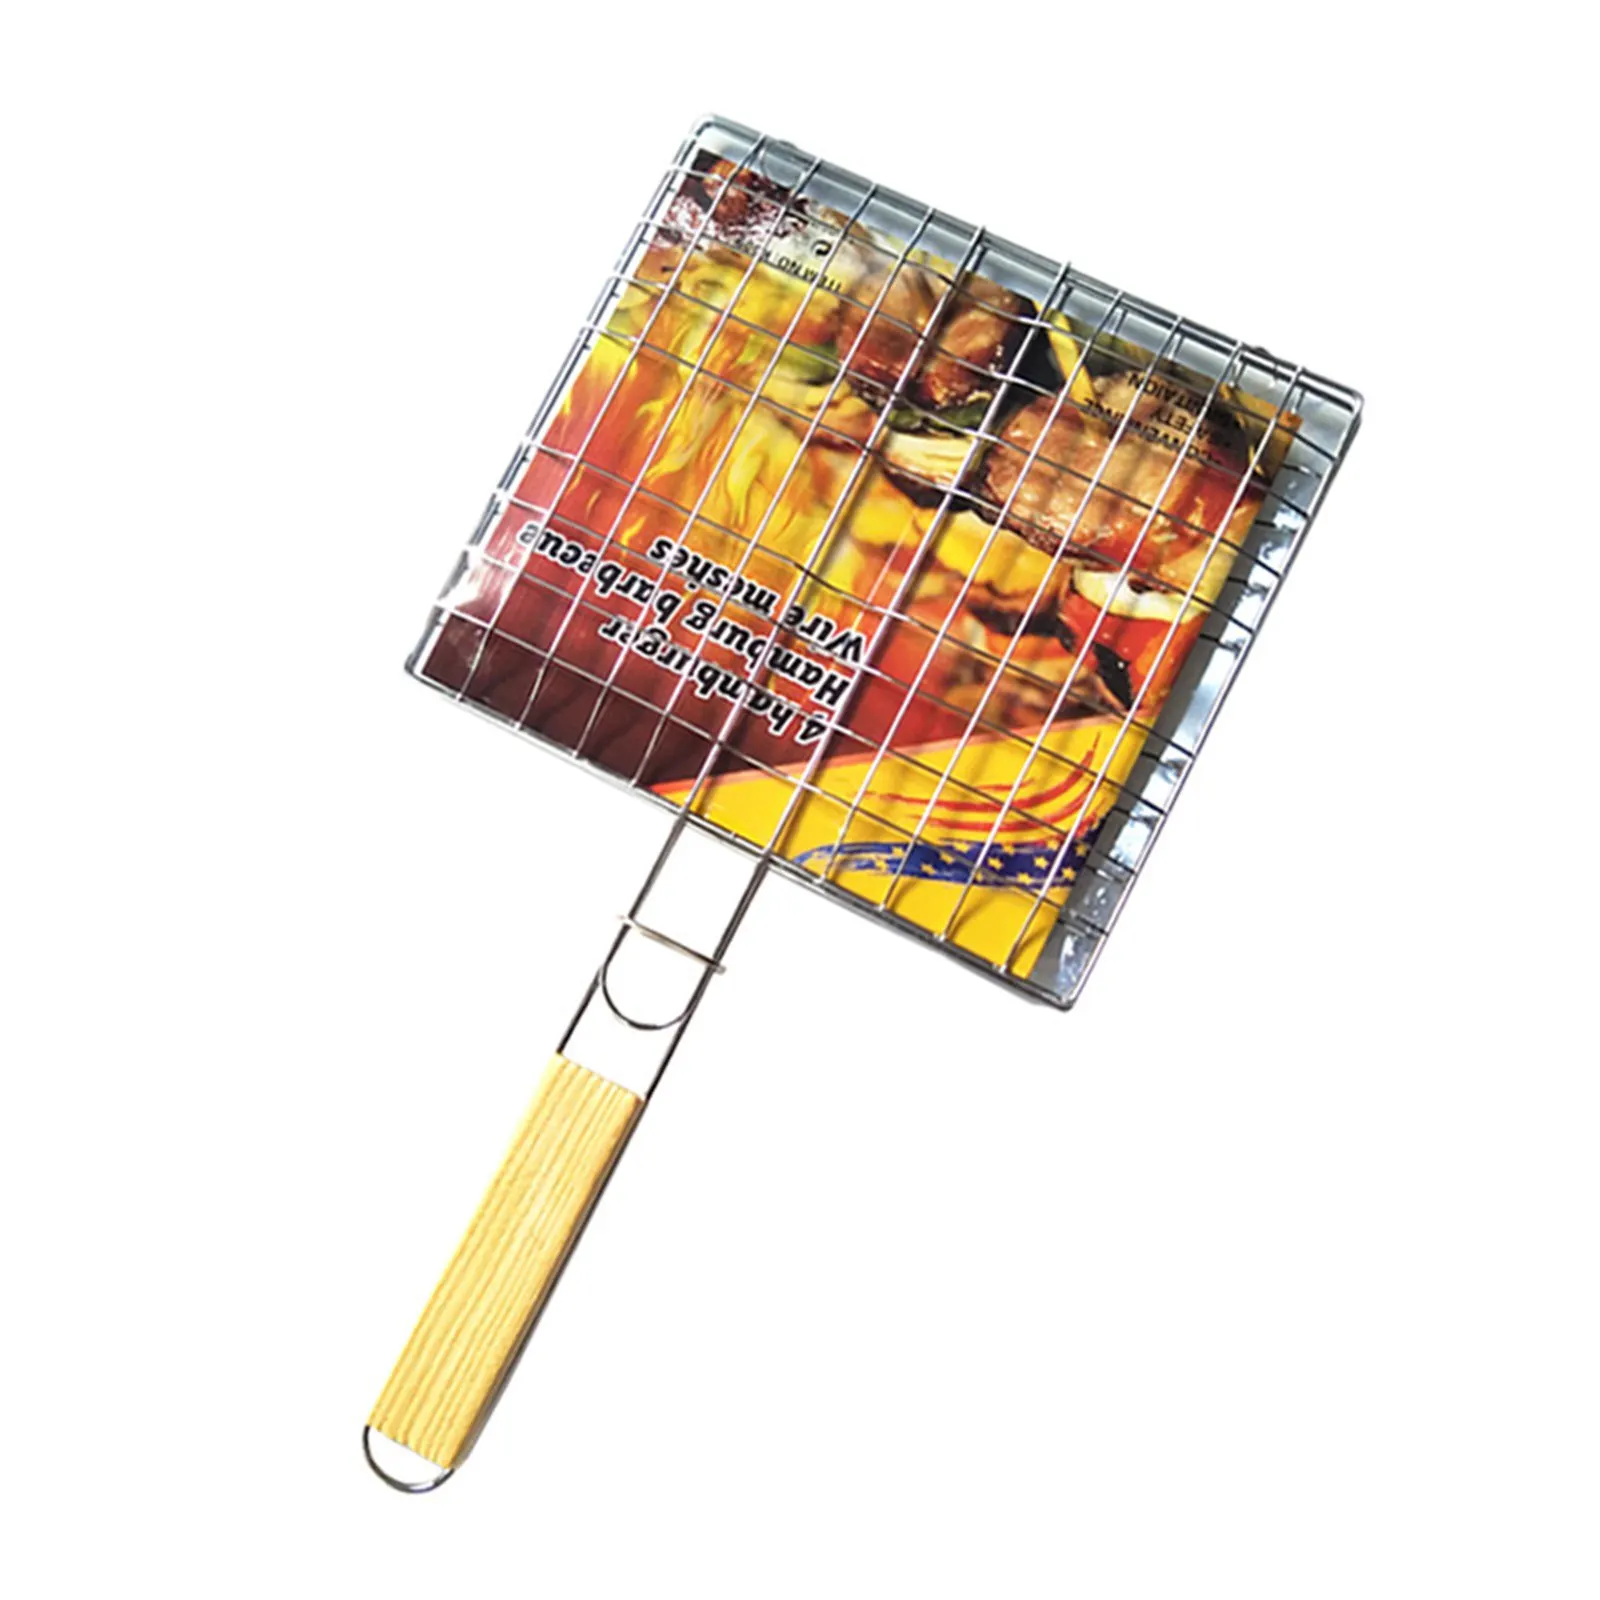 Illing basket grill bbq net steak meat fish mesh holder home tools bbq barbecue cooking thumb200